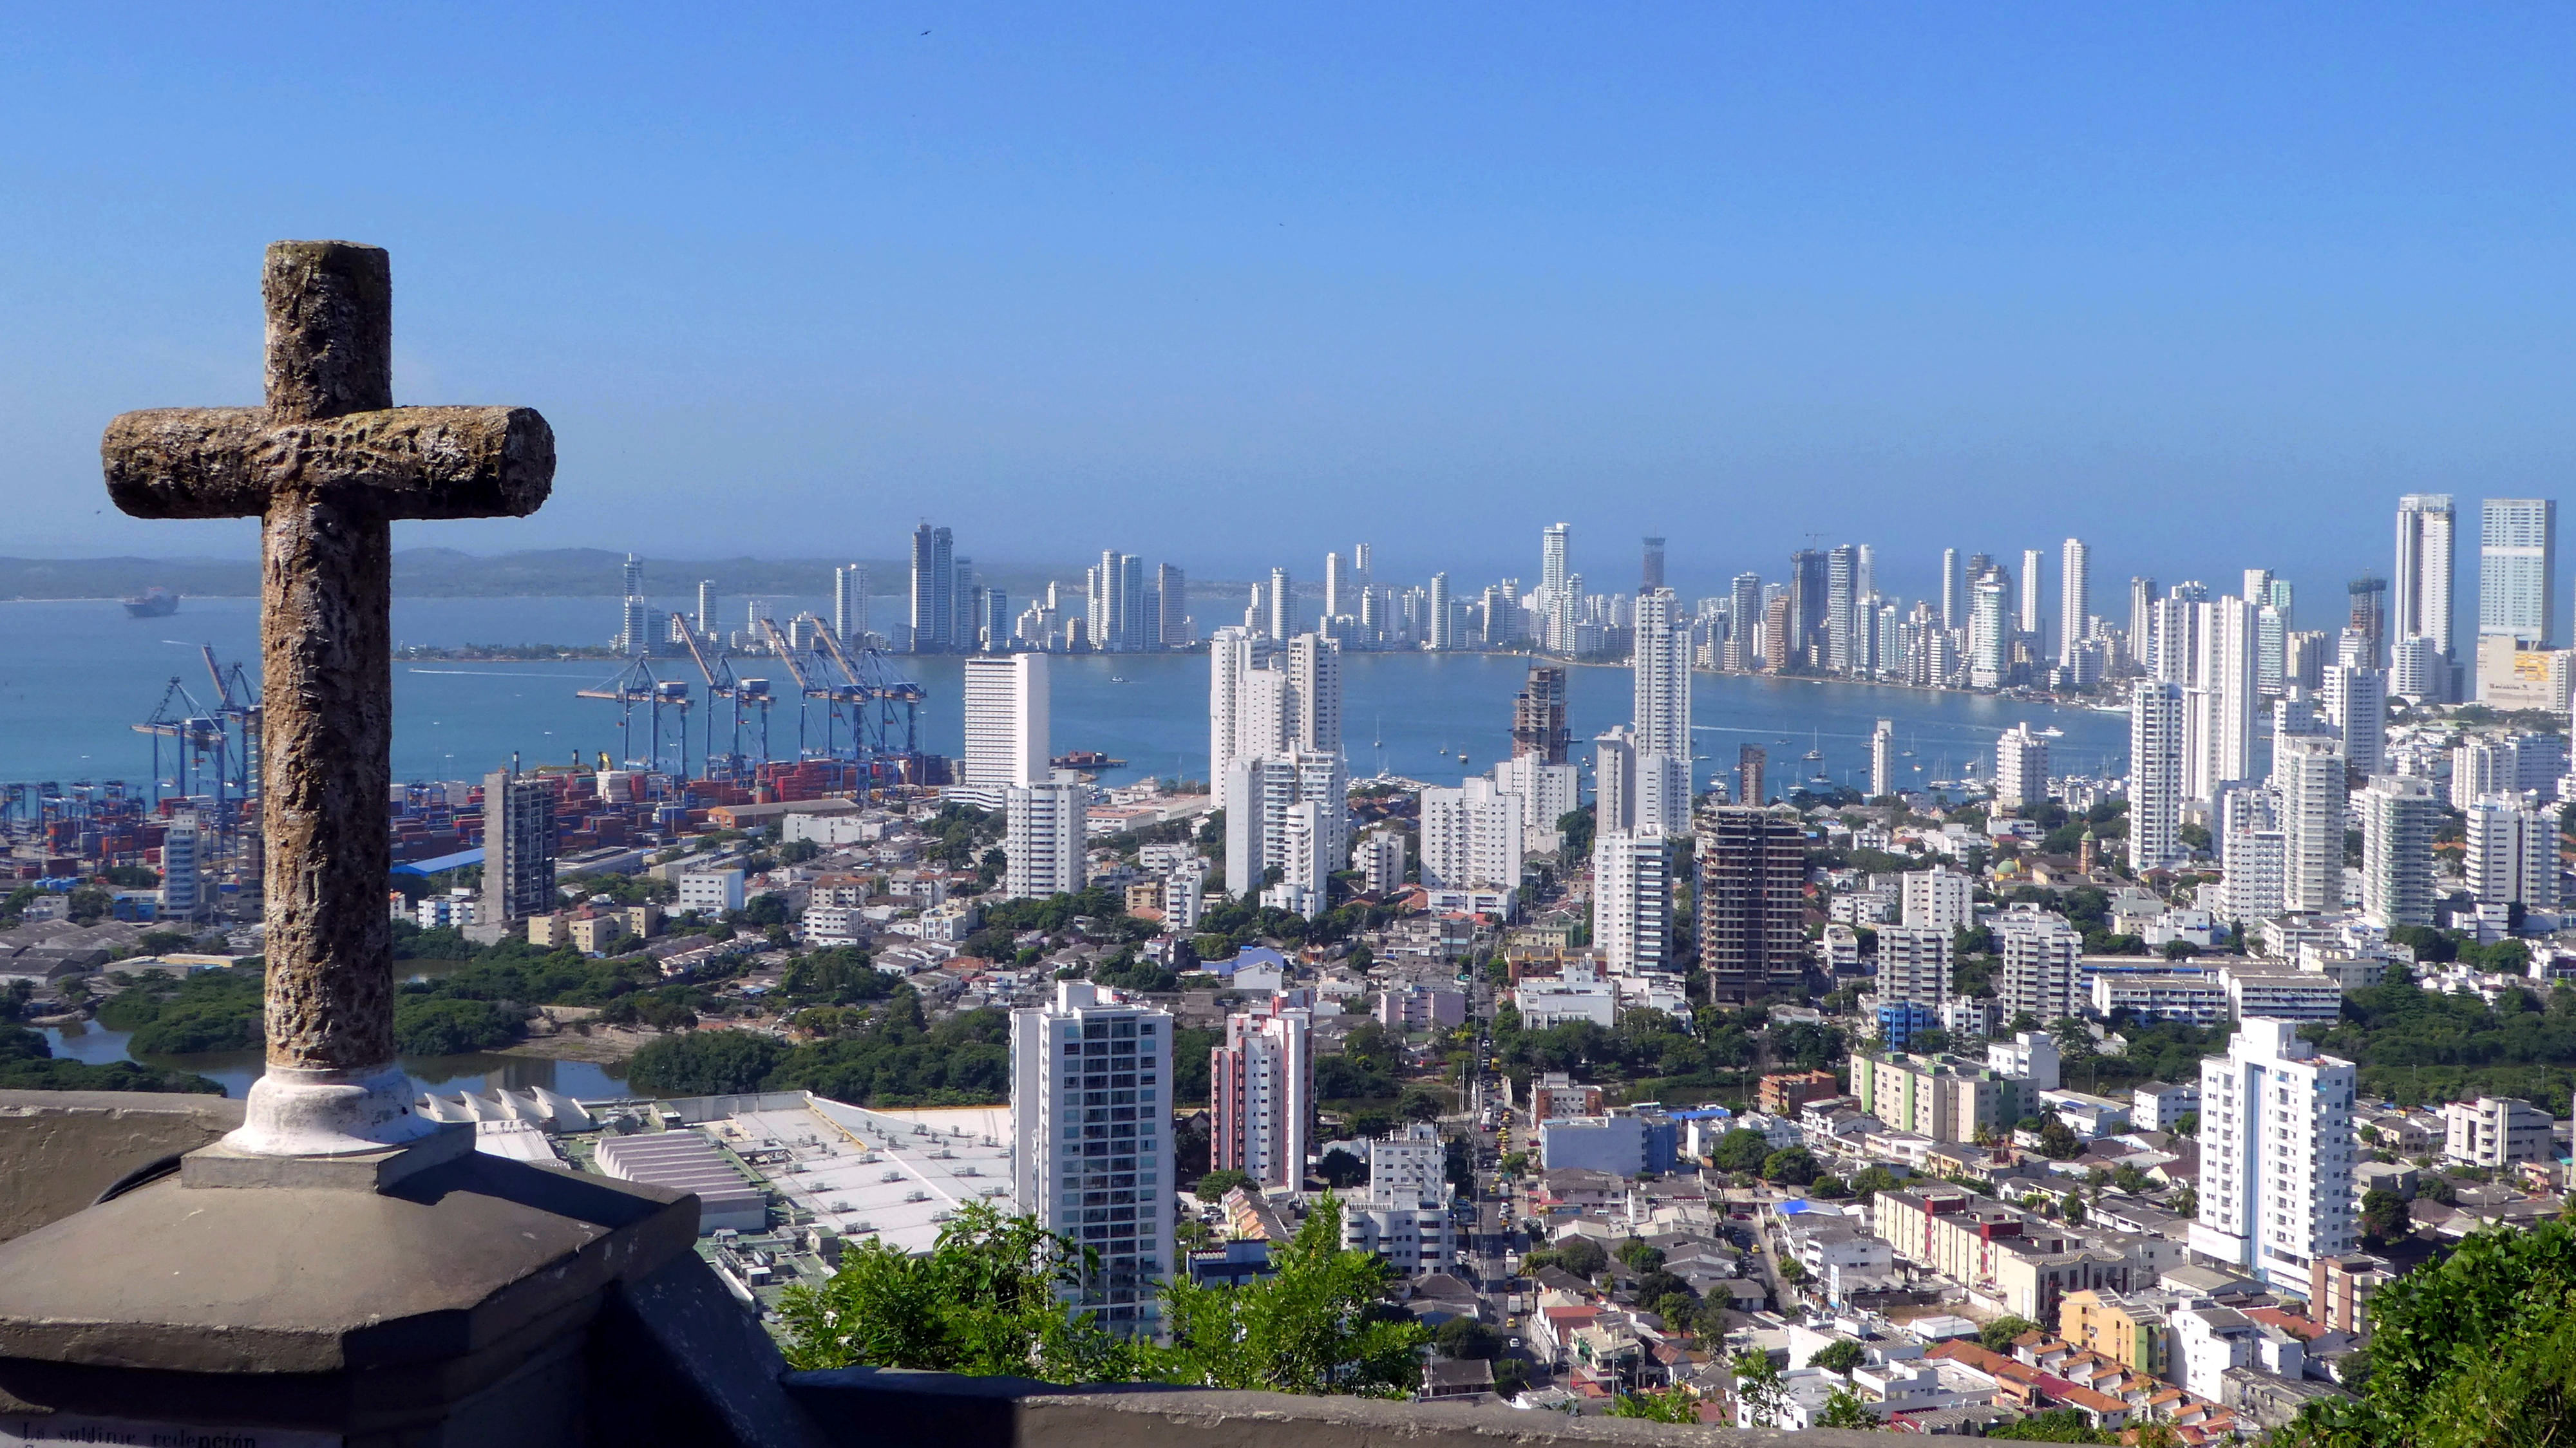 View of the city of Cartagena on the Colombian Caribbean coast